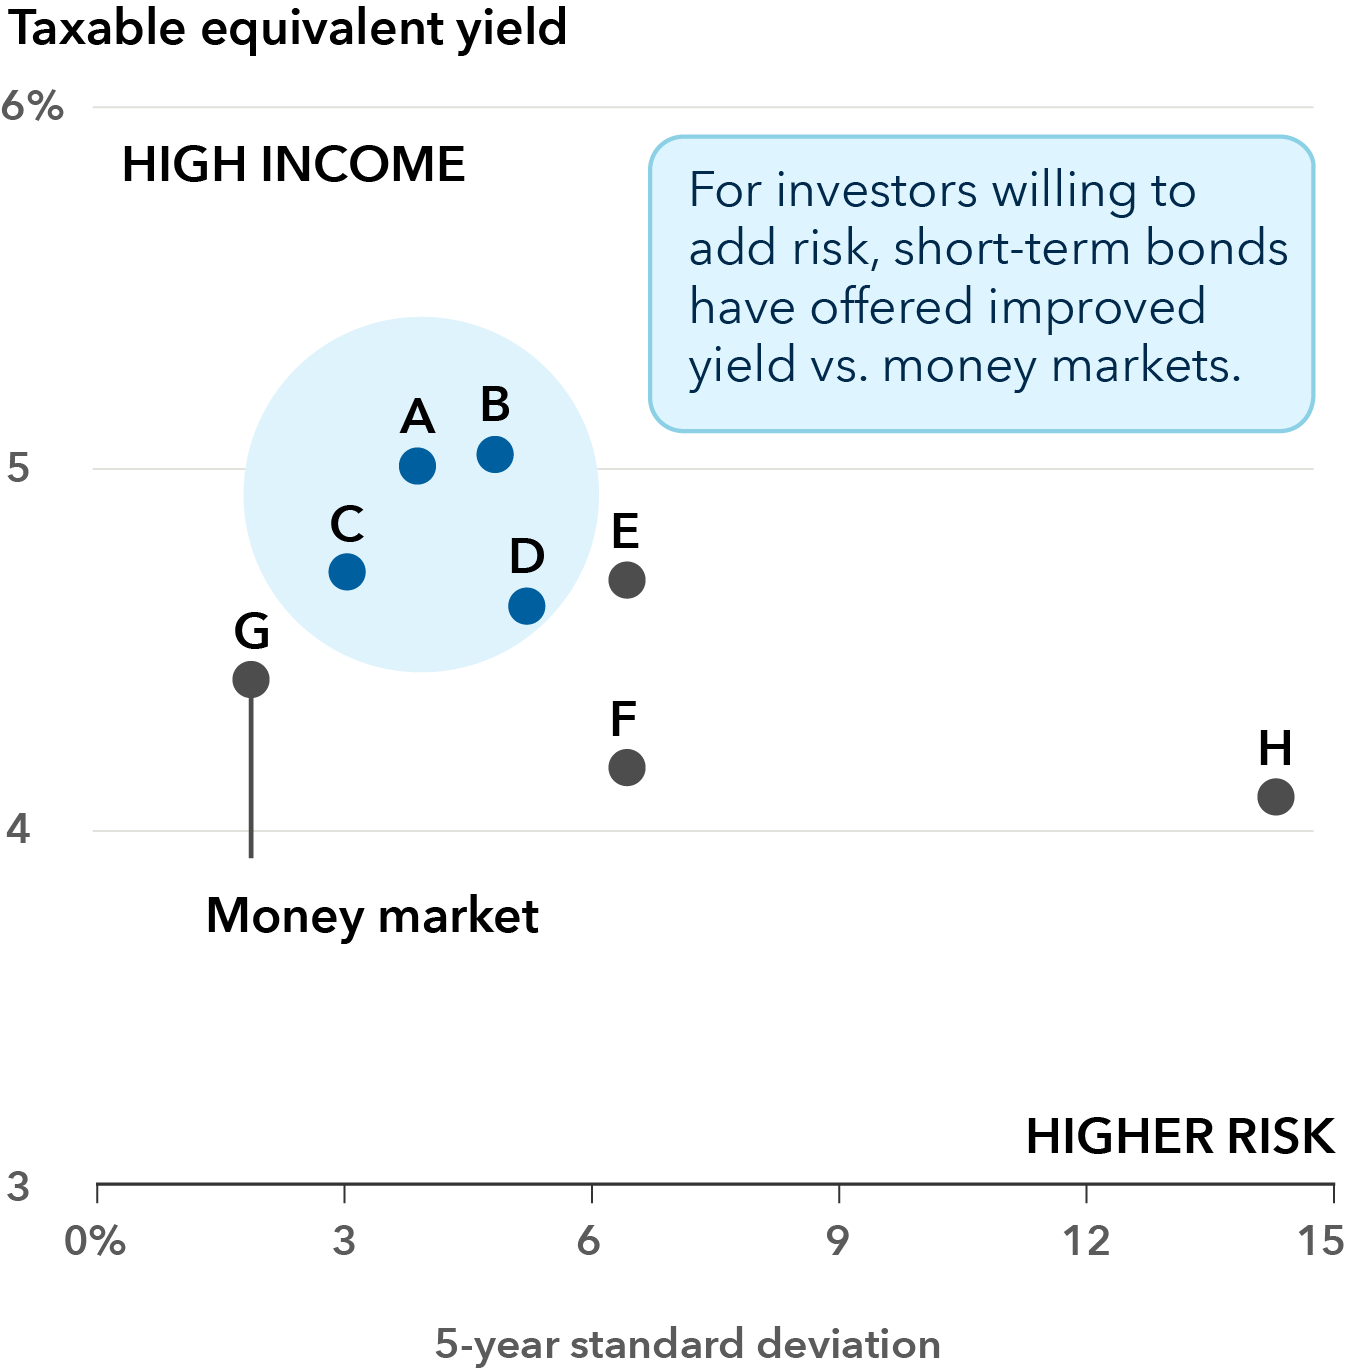 A chart that shows taxable equivalent yield on the y-axis measuring from 3% to 6% with a label near 6% that says higher return and 5-year standard deviation on the x-axis measuring from 0% to 15% with a label near 15% that says higher risk. The values are marked with dots and letters A-H. A indicates 1-5 year municipal, B indicates 1-10 year municipal, C indicates 1-3 year taxable, D indicates intermediate taxable, E indicates core, F indicates Treasury, G indicates money market and H indicates long Treasury. The dots for values A through D are green and encompassed by a light blue circle next to text that says “For investors willing to add risk, short-term bonds have offered improved yield vs. money markets.” These values are near the 5% taxable equivalent yield line and within the 0-3% values on the x-axis. The G dot, indicating the money market, is the lowest risk (near 0% 5-year standard deviation) and the tax equivalent yield is at about 4.5%. The H dot, indicating long Treasury has the highest risk at just below 15% on the x-axis and a tax equivalent yield slightly above 4%. This is the lowest yield shown on the chart. 1-year municipals and 1-10 year municipals have the highest taxable equivalent yields on the chart on or slightly above the 5% line and are around 2-3% on the x-axis.